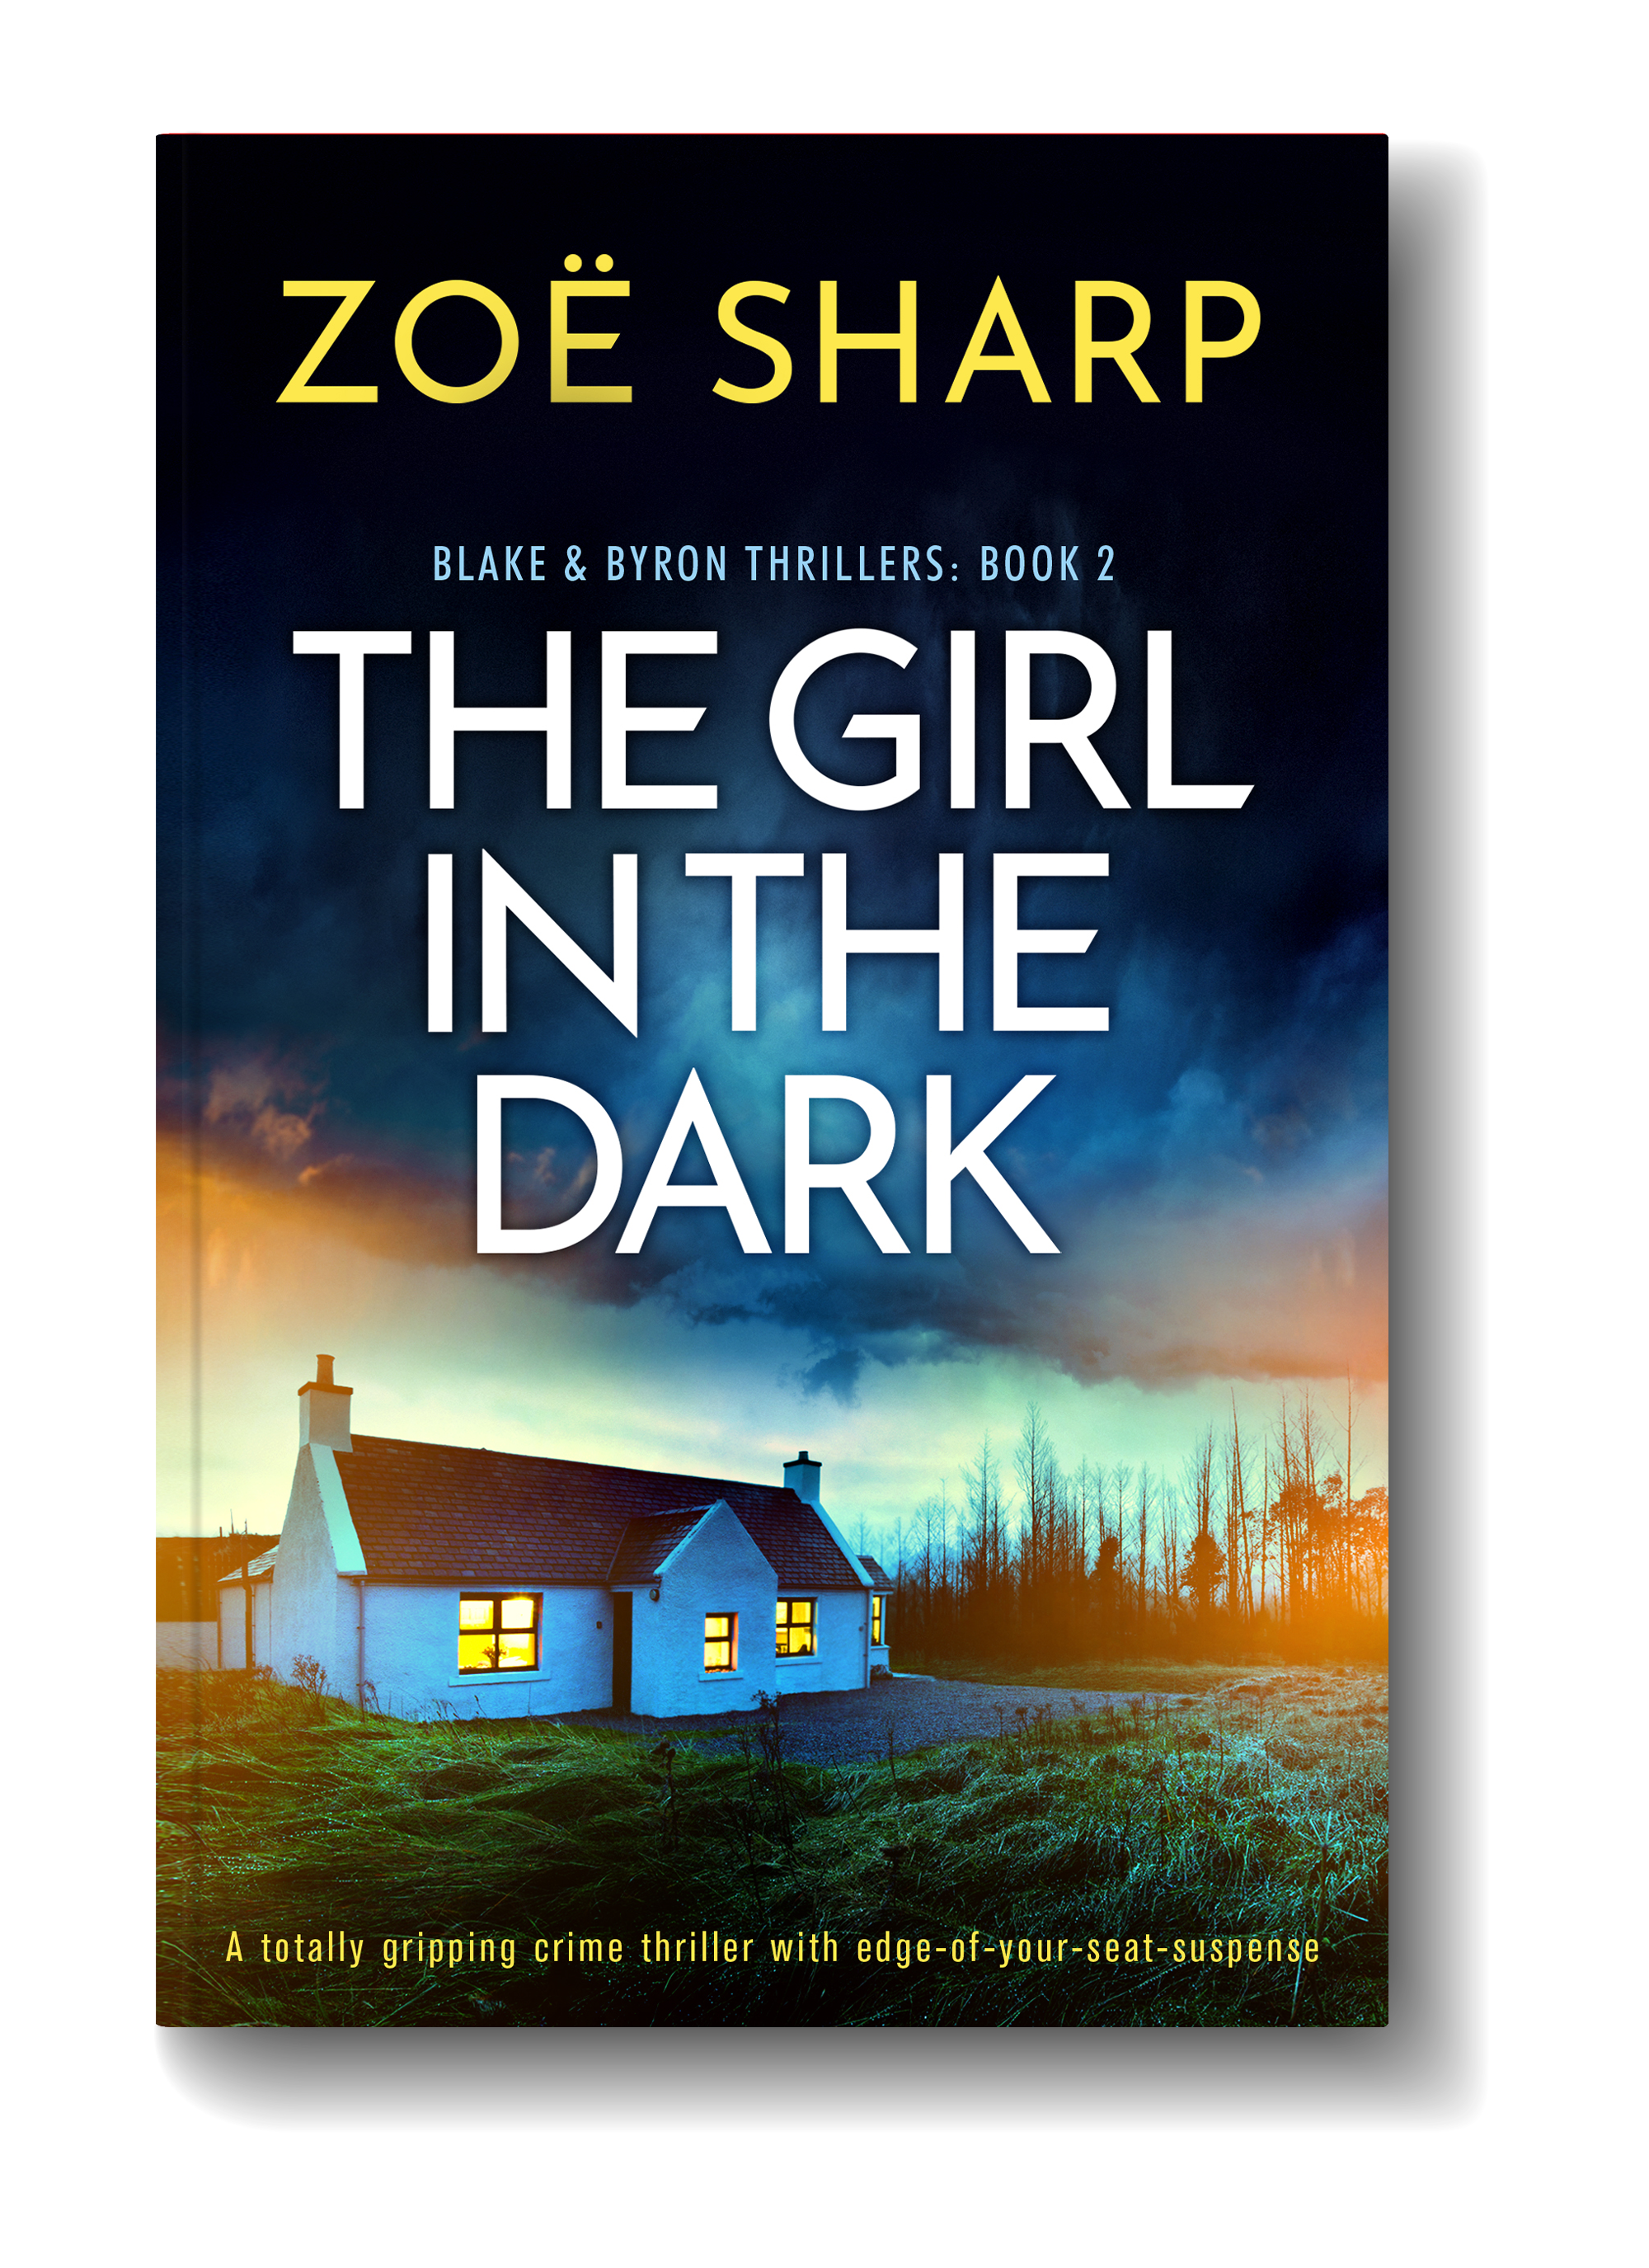 The Girl in the Dark: A book review